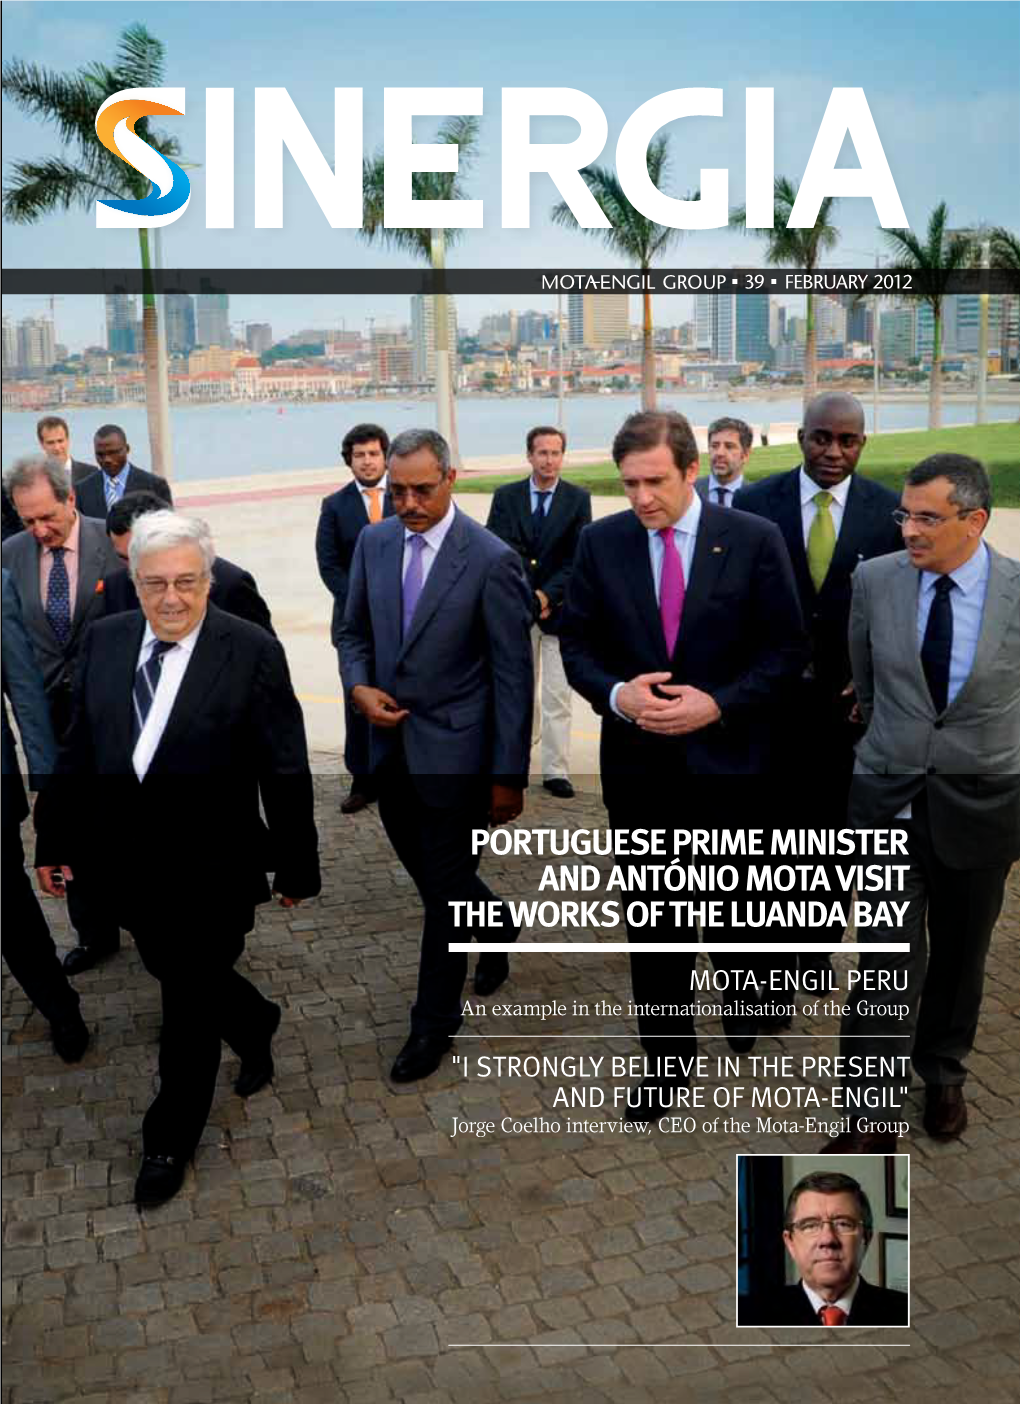 Portuguese Prime Minister and António Mota Visit the Works of the Luanda Bay